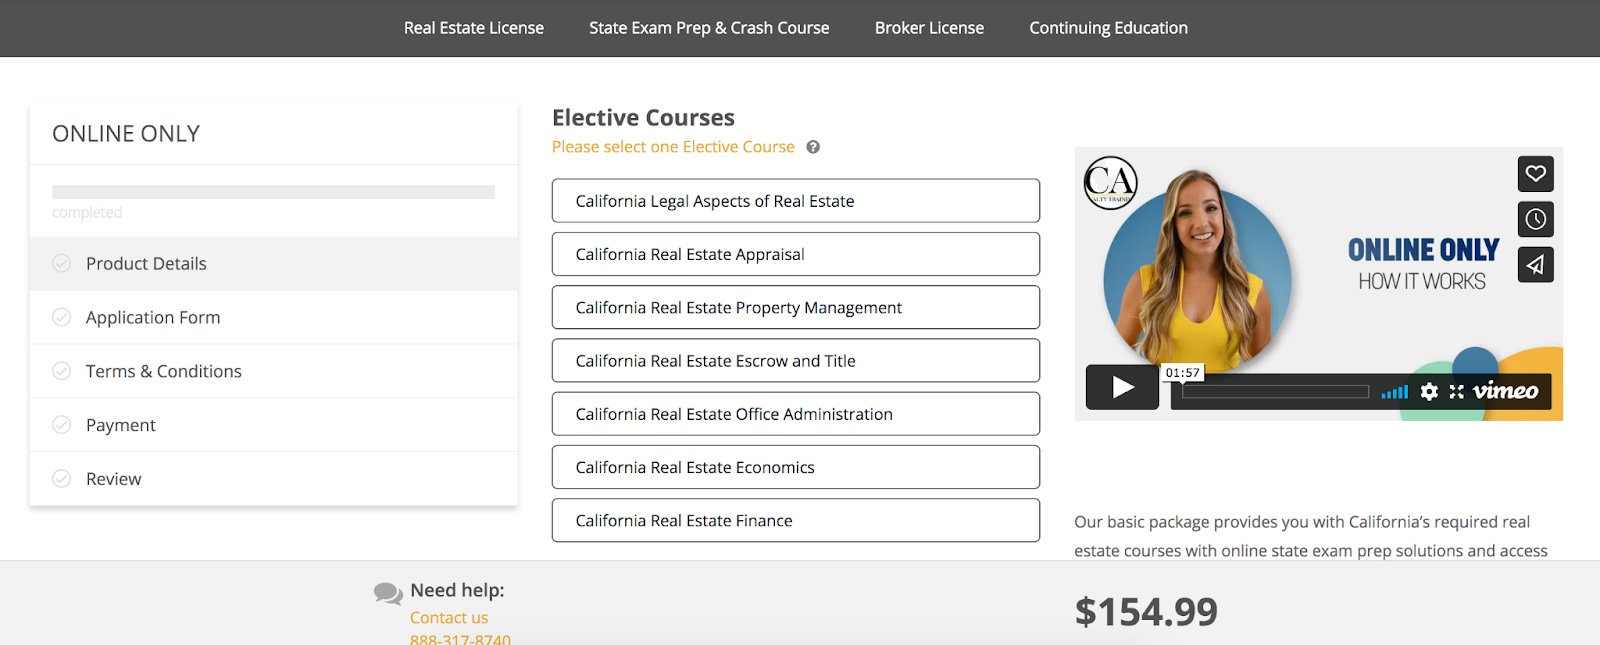 California Realty Training Online course enrollment.